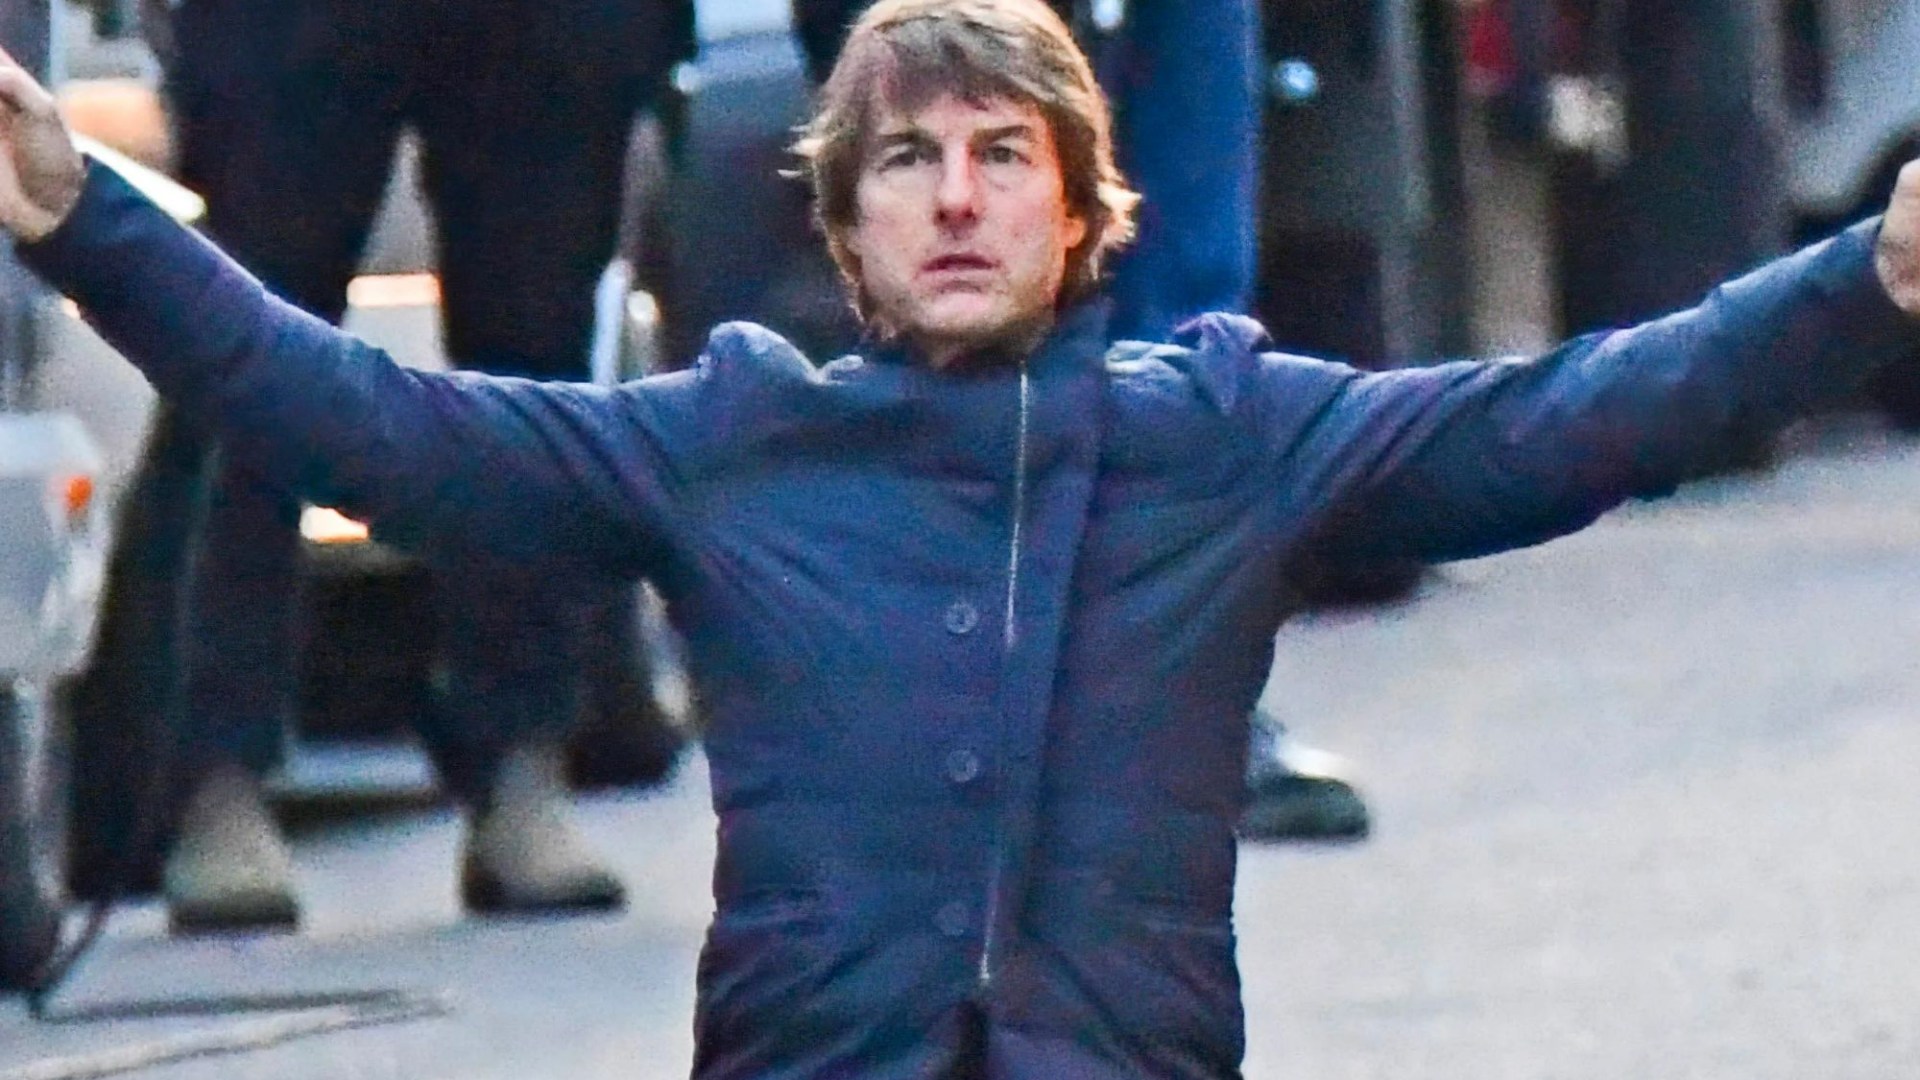 Tom Cruise looks terrified as he films dramatic Mission Impossible 8 scenes in London [Video]